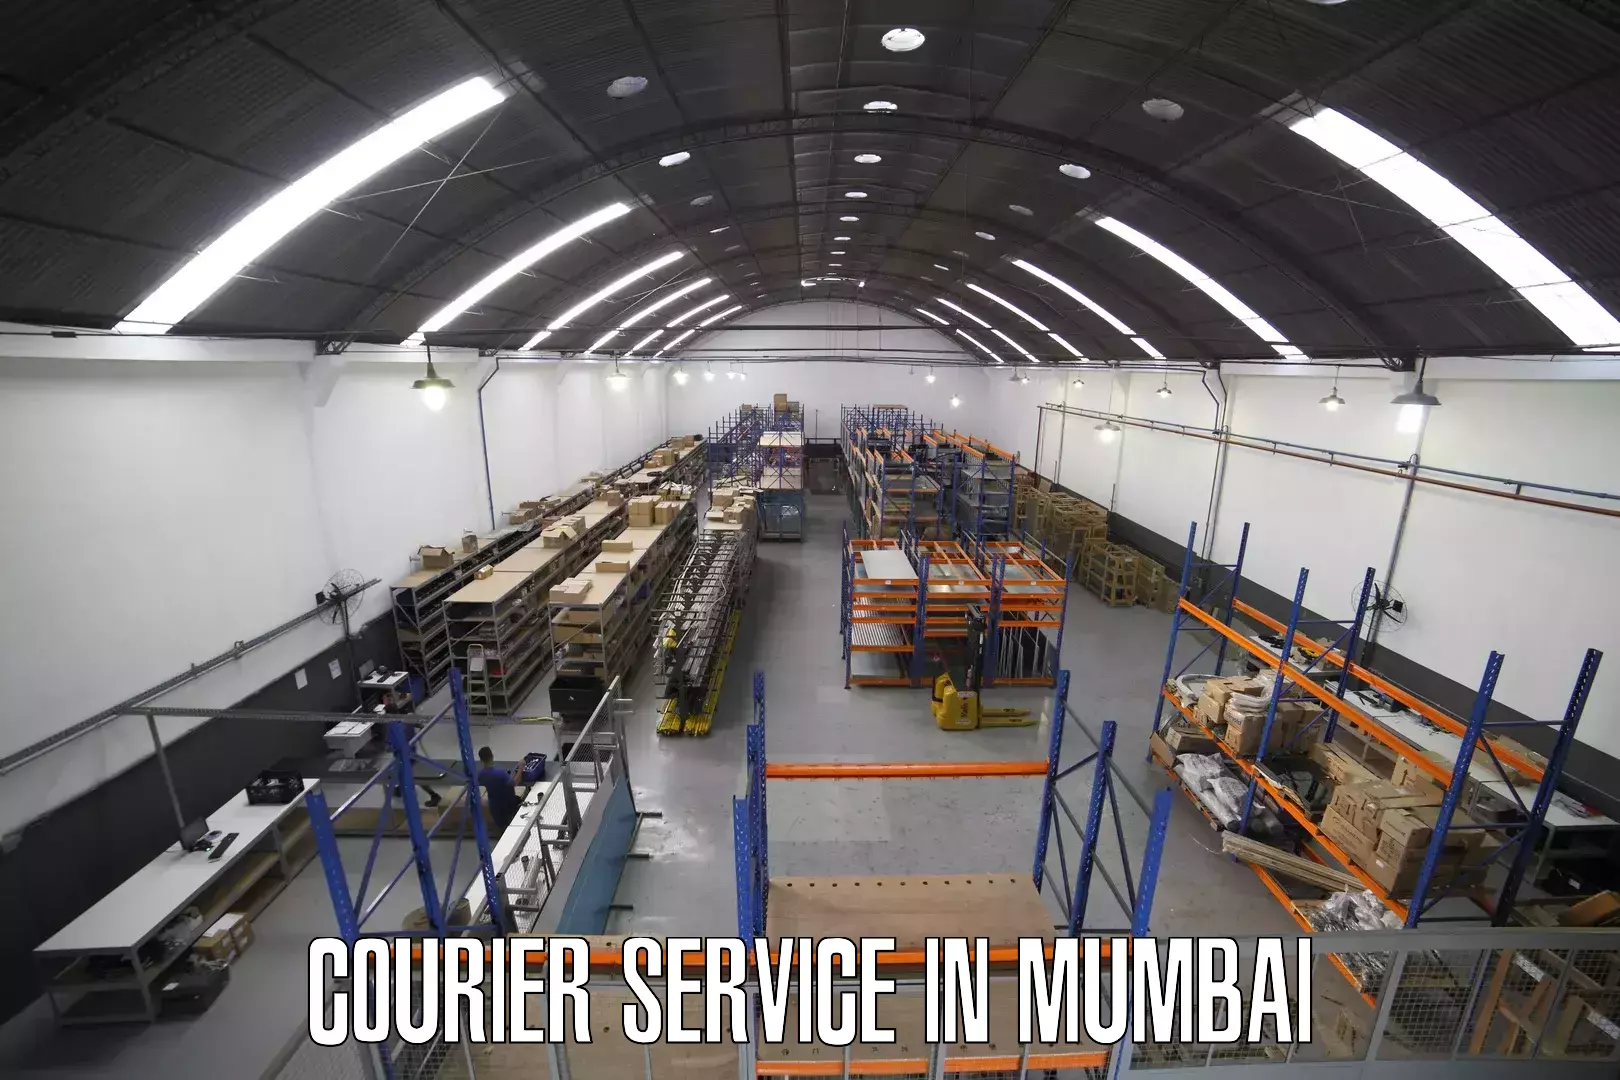 State-of-the-art courier technology in Mumbai